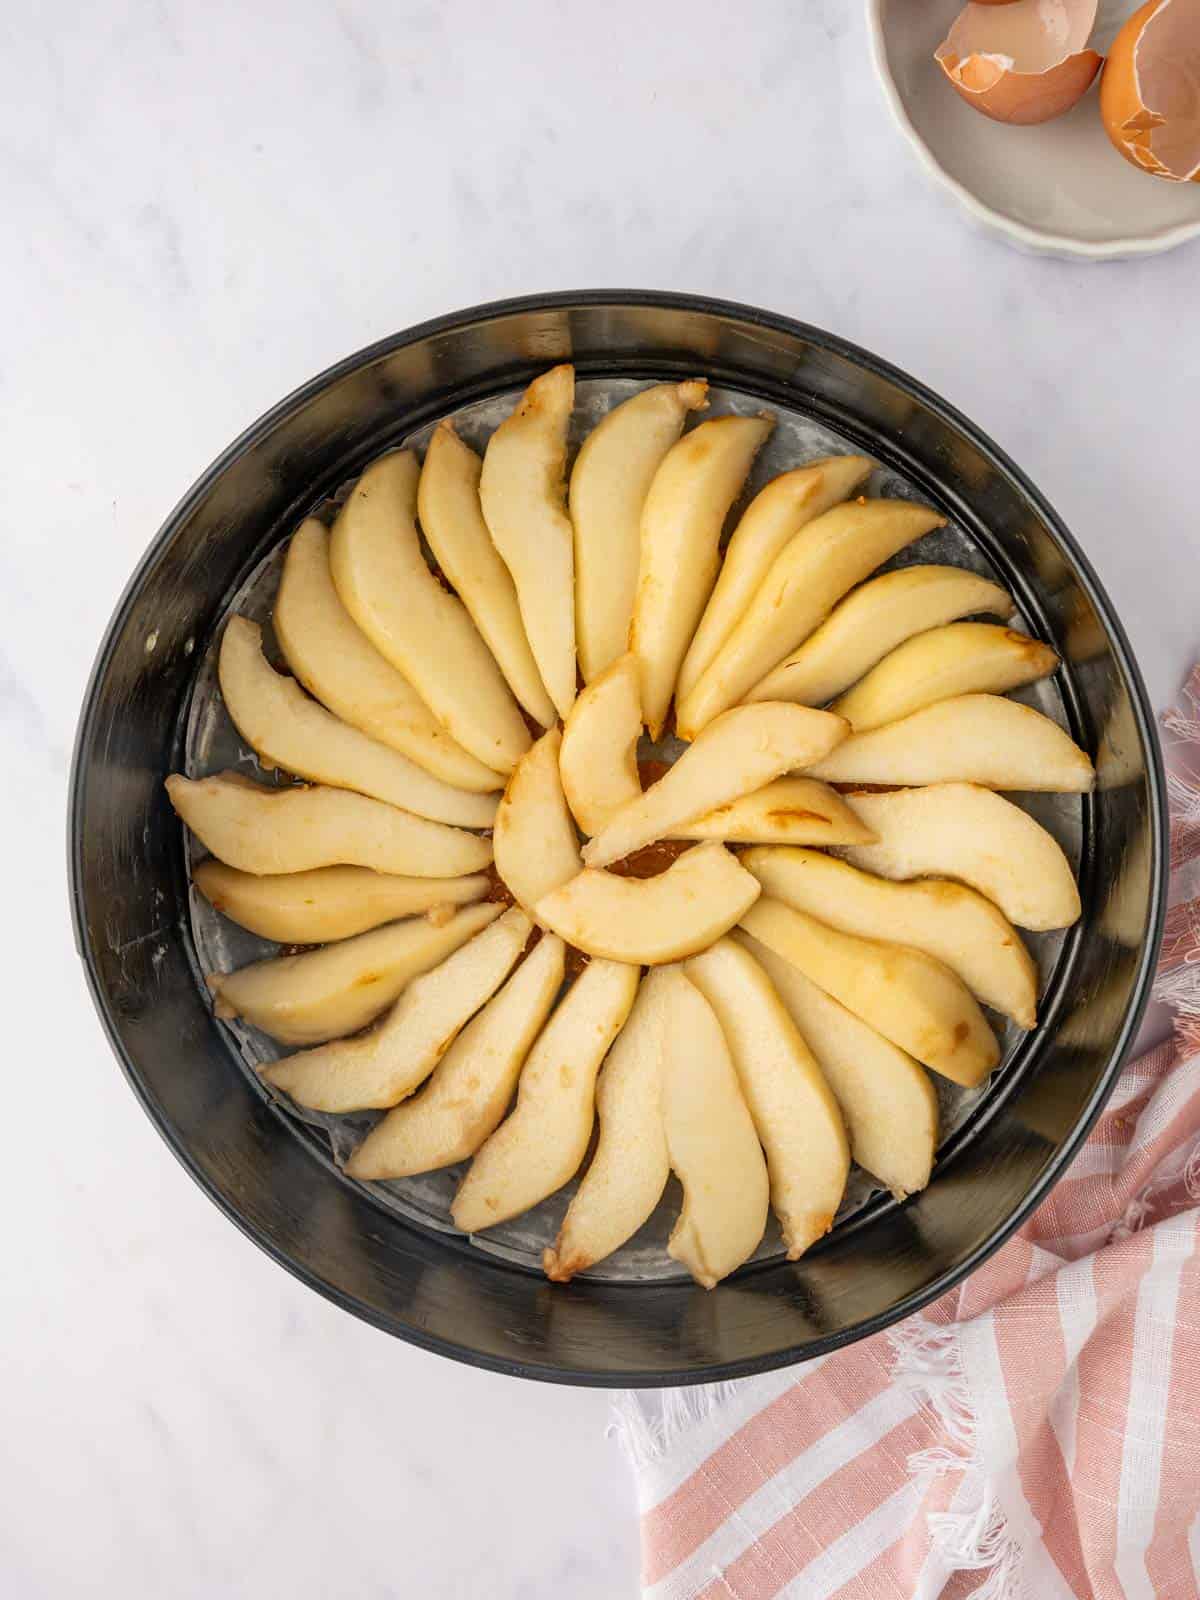 Pear slices are artfully arranged in a cake pan.